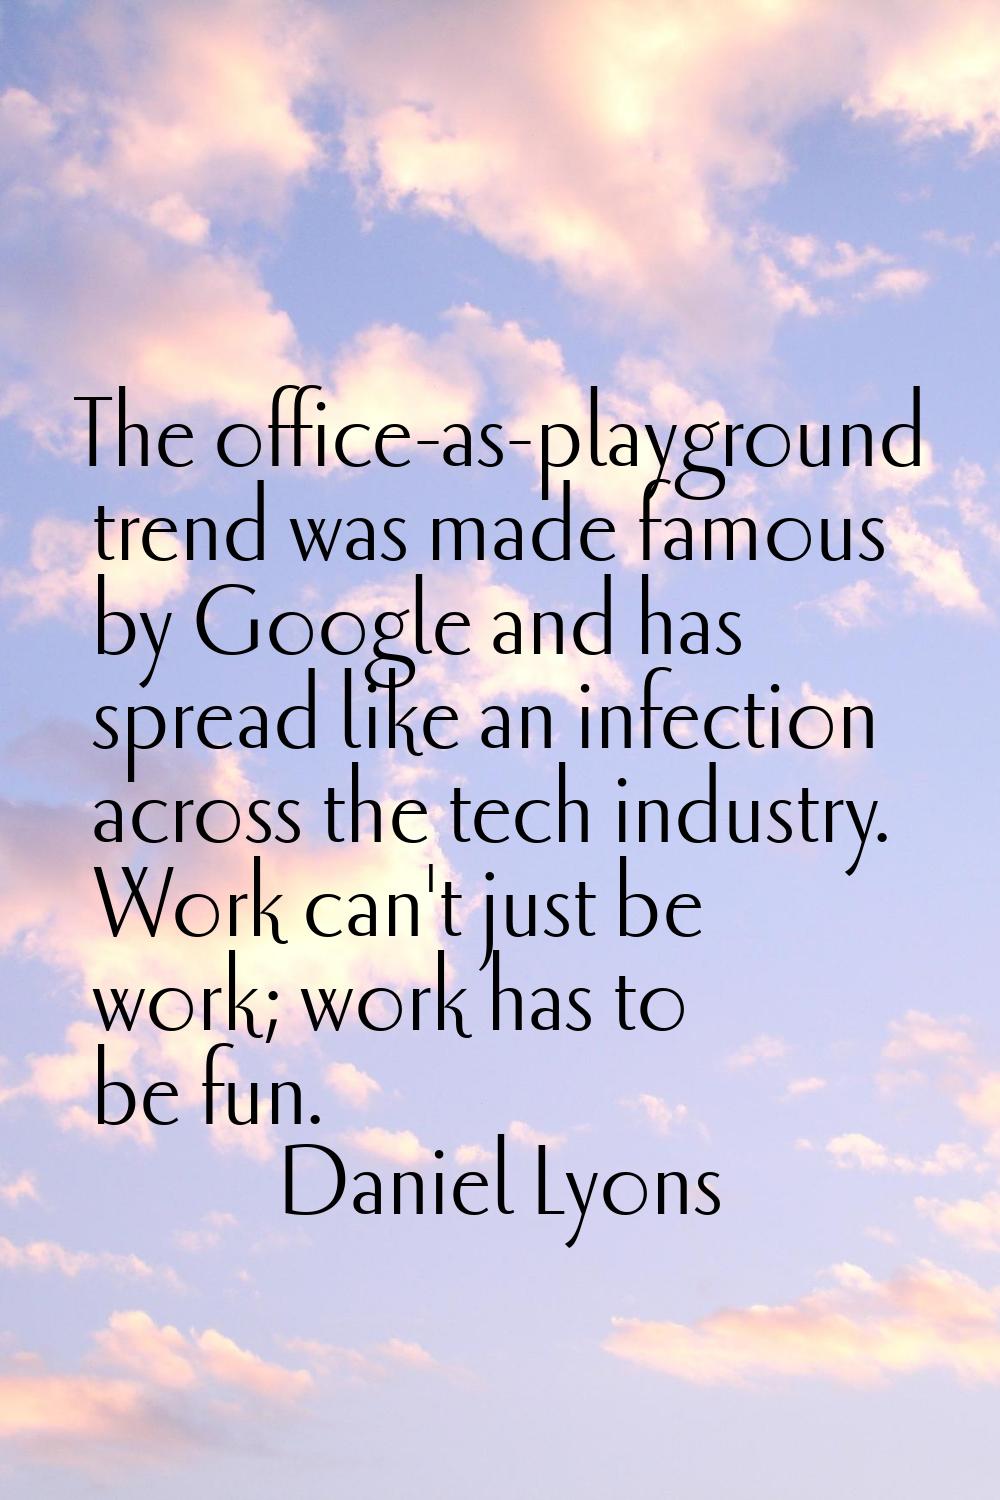 The office-as-playground trend was made famous by Google and has spread like an infection across th